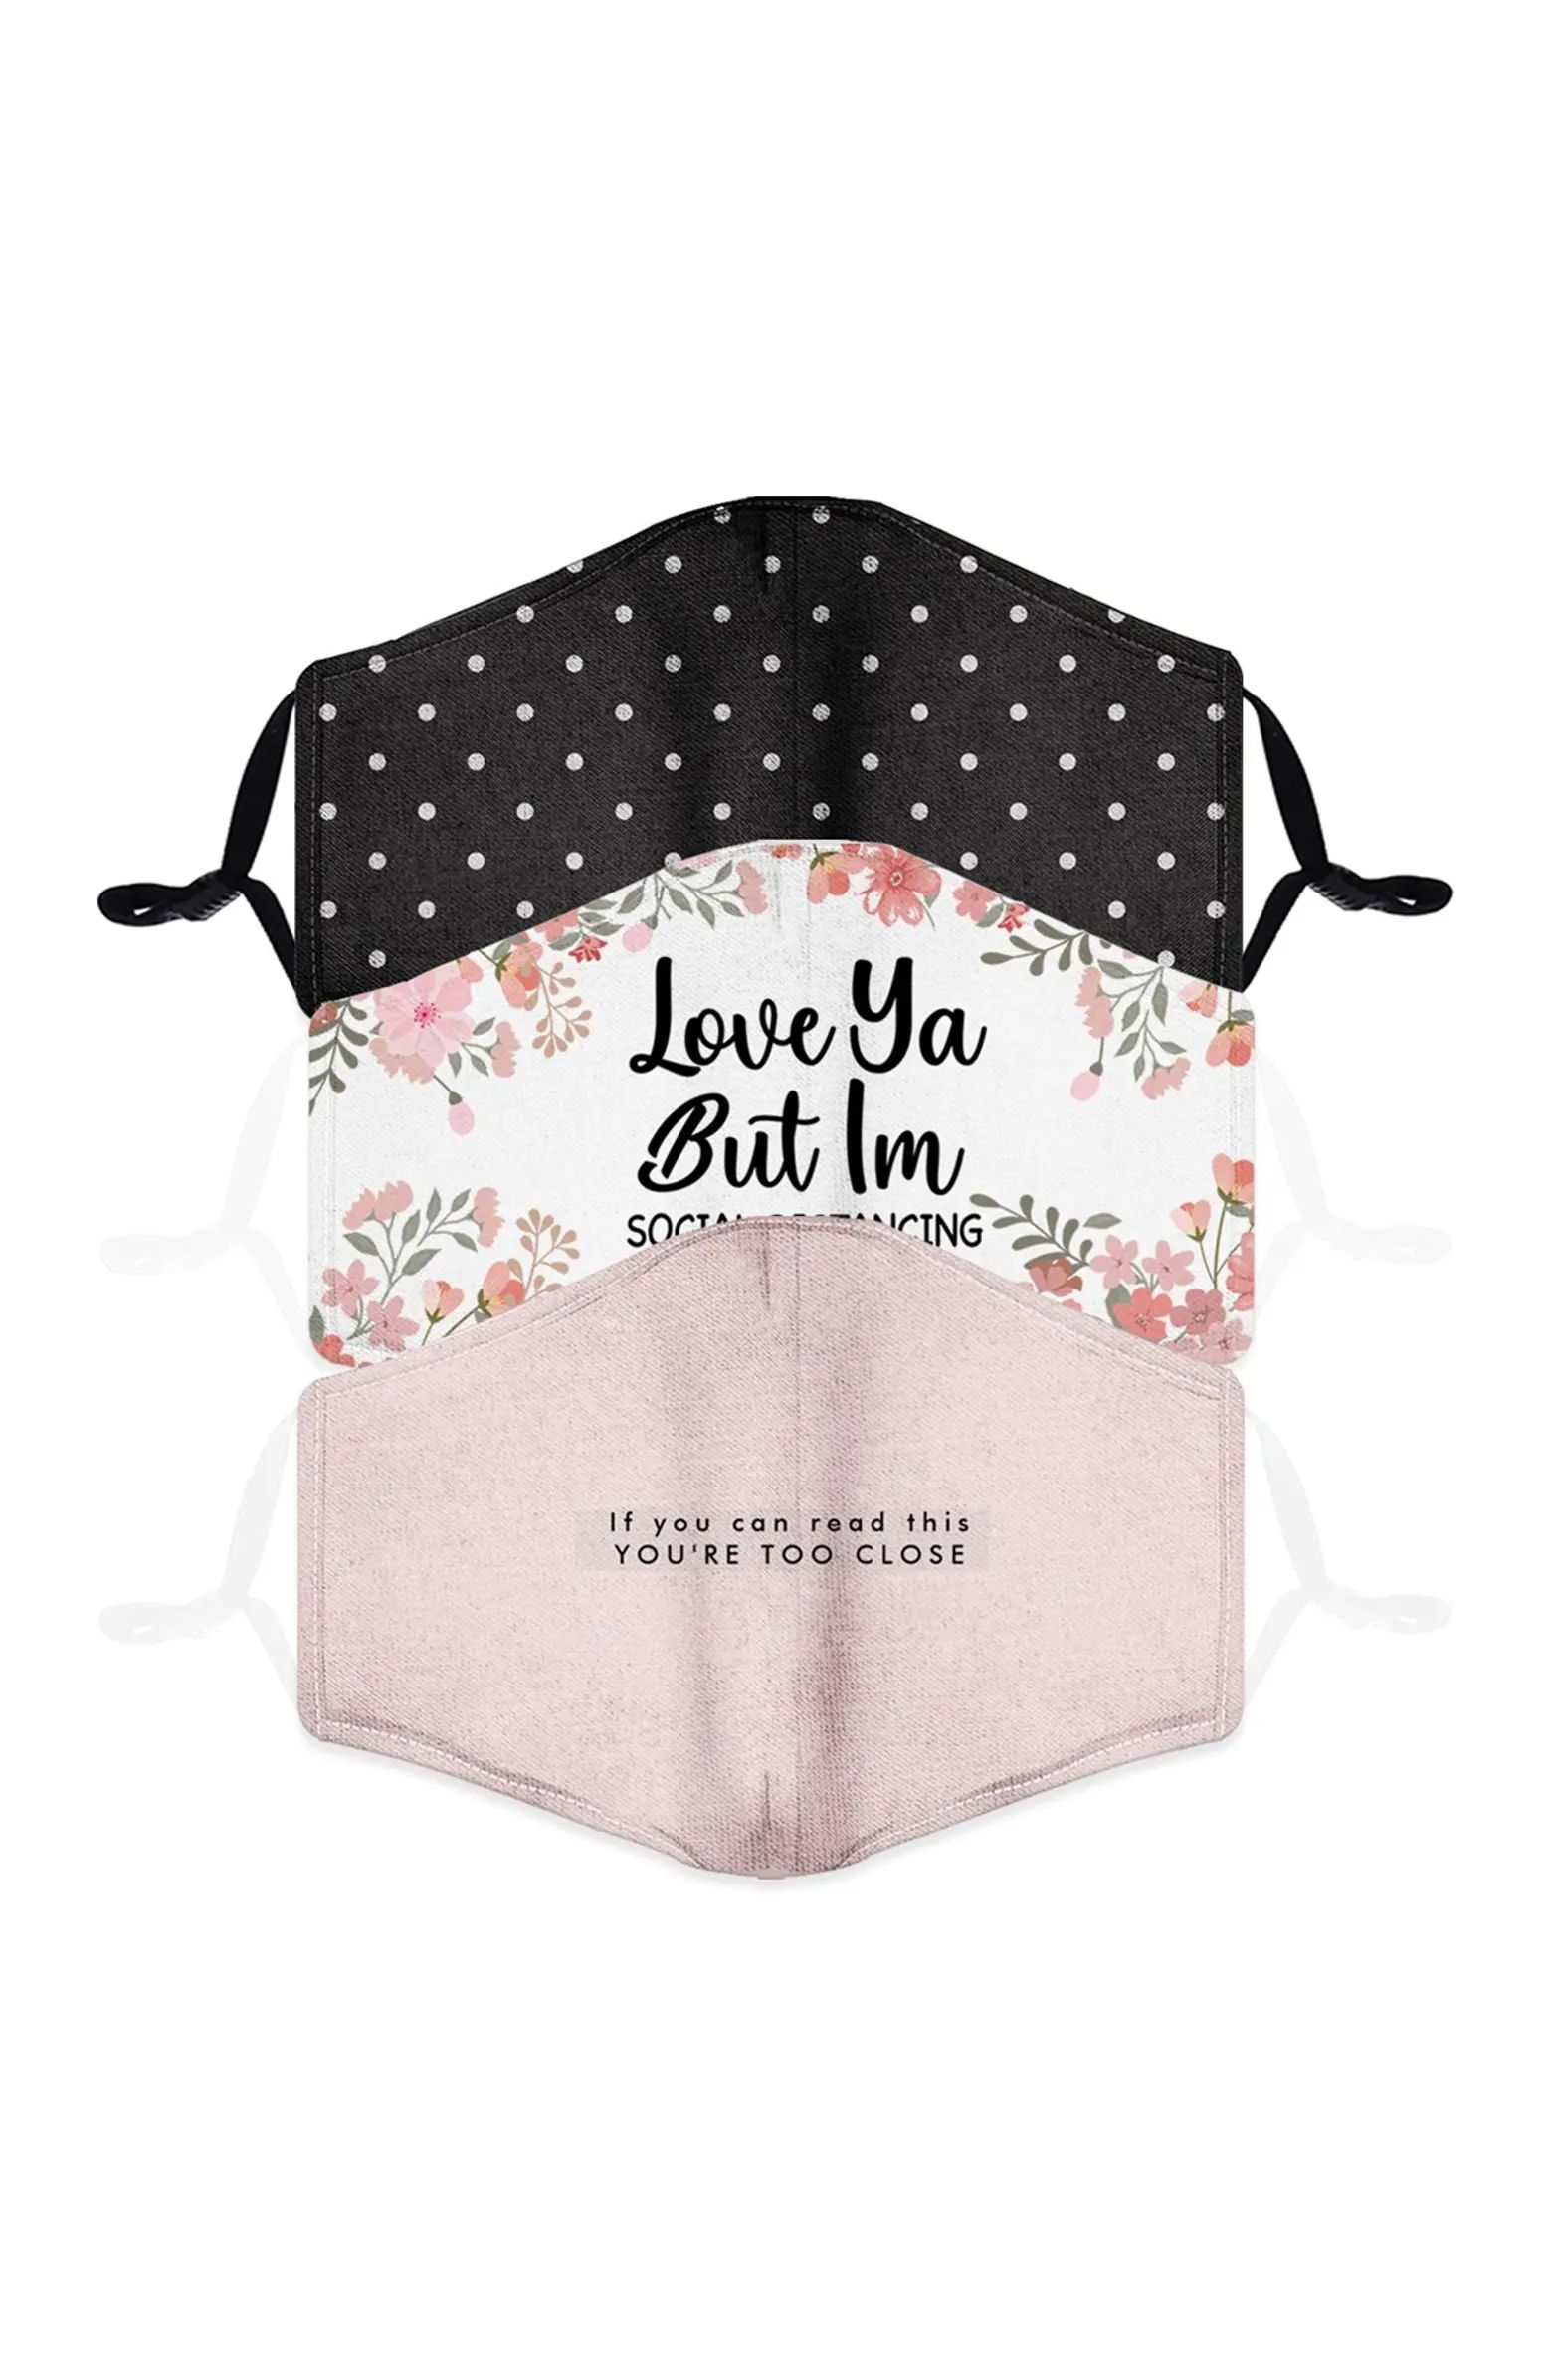 Reusable Fashion Adult Face Mask - Pack of 3 - Quote & Polka Dots | Nordstrom Rack